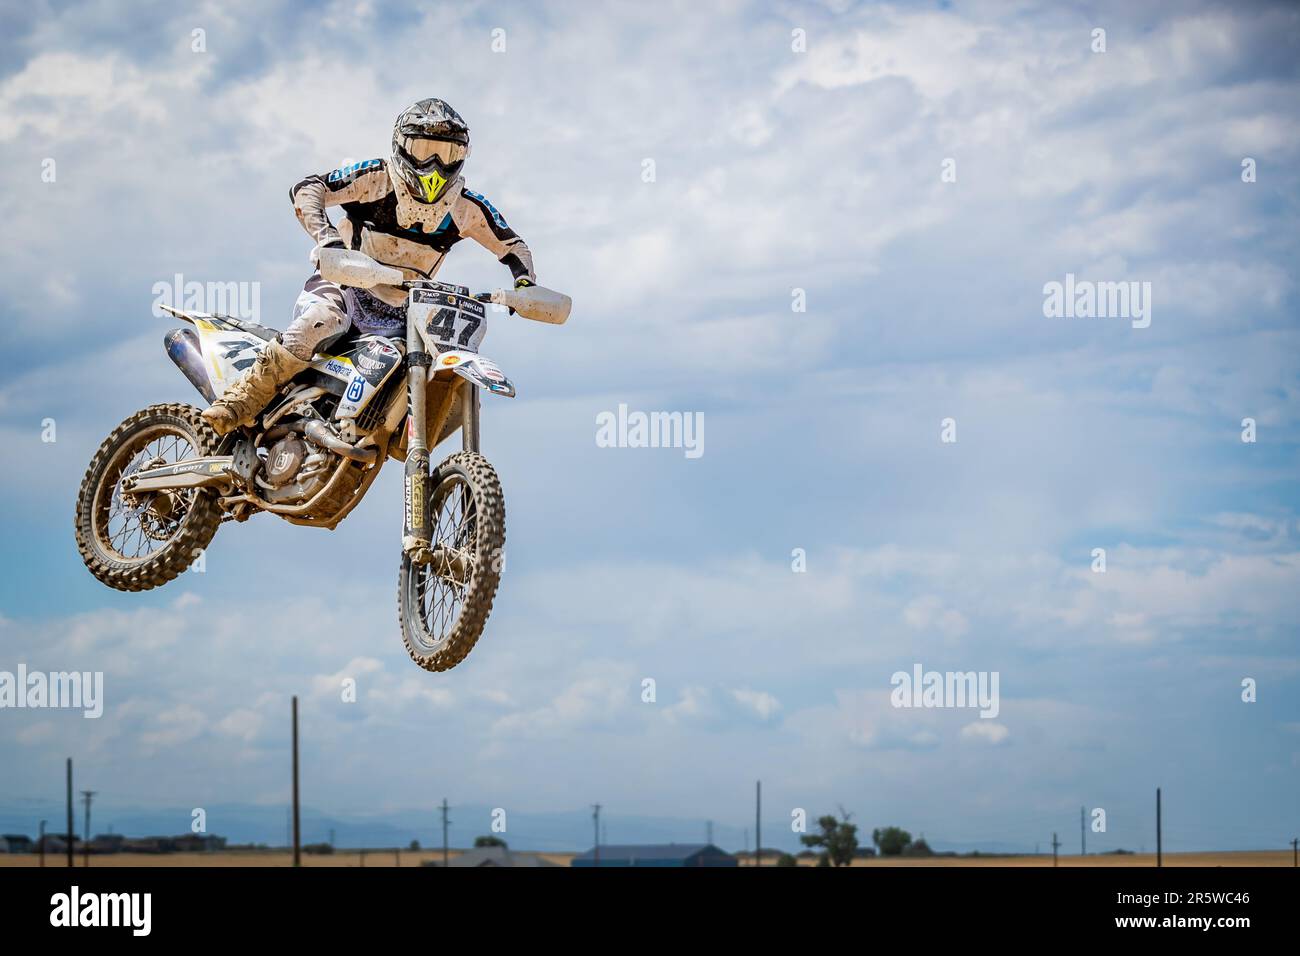 A male dirt biker is captured jumping his motorbike into the air, his body and bike silhouetted against the sky Stock Photo